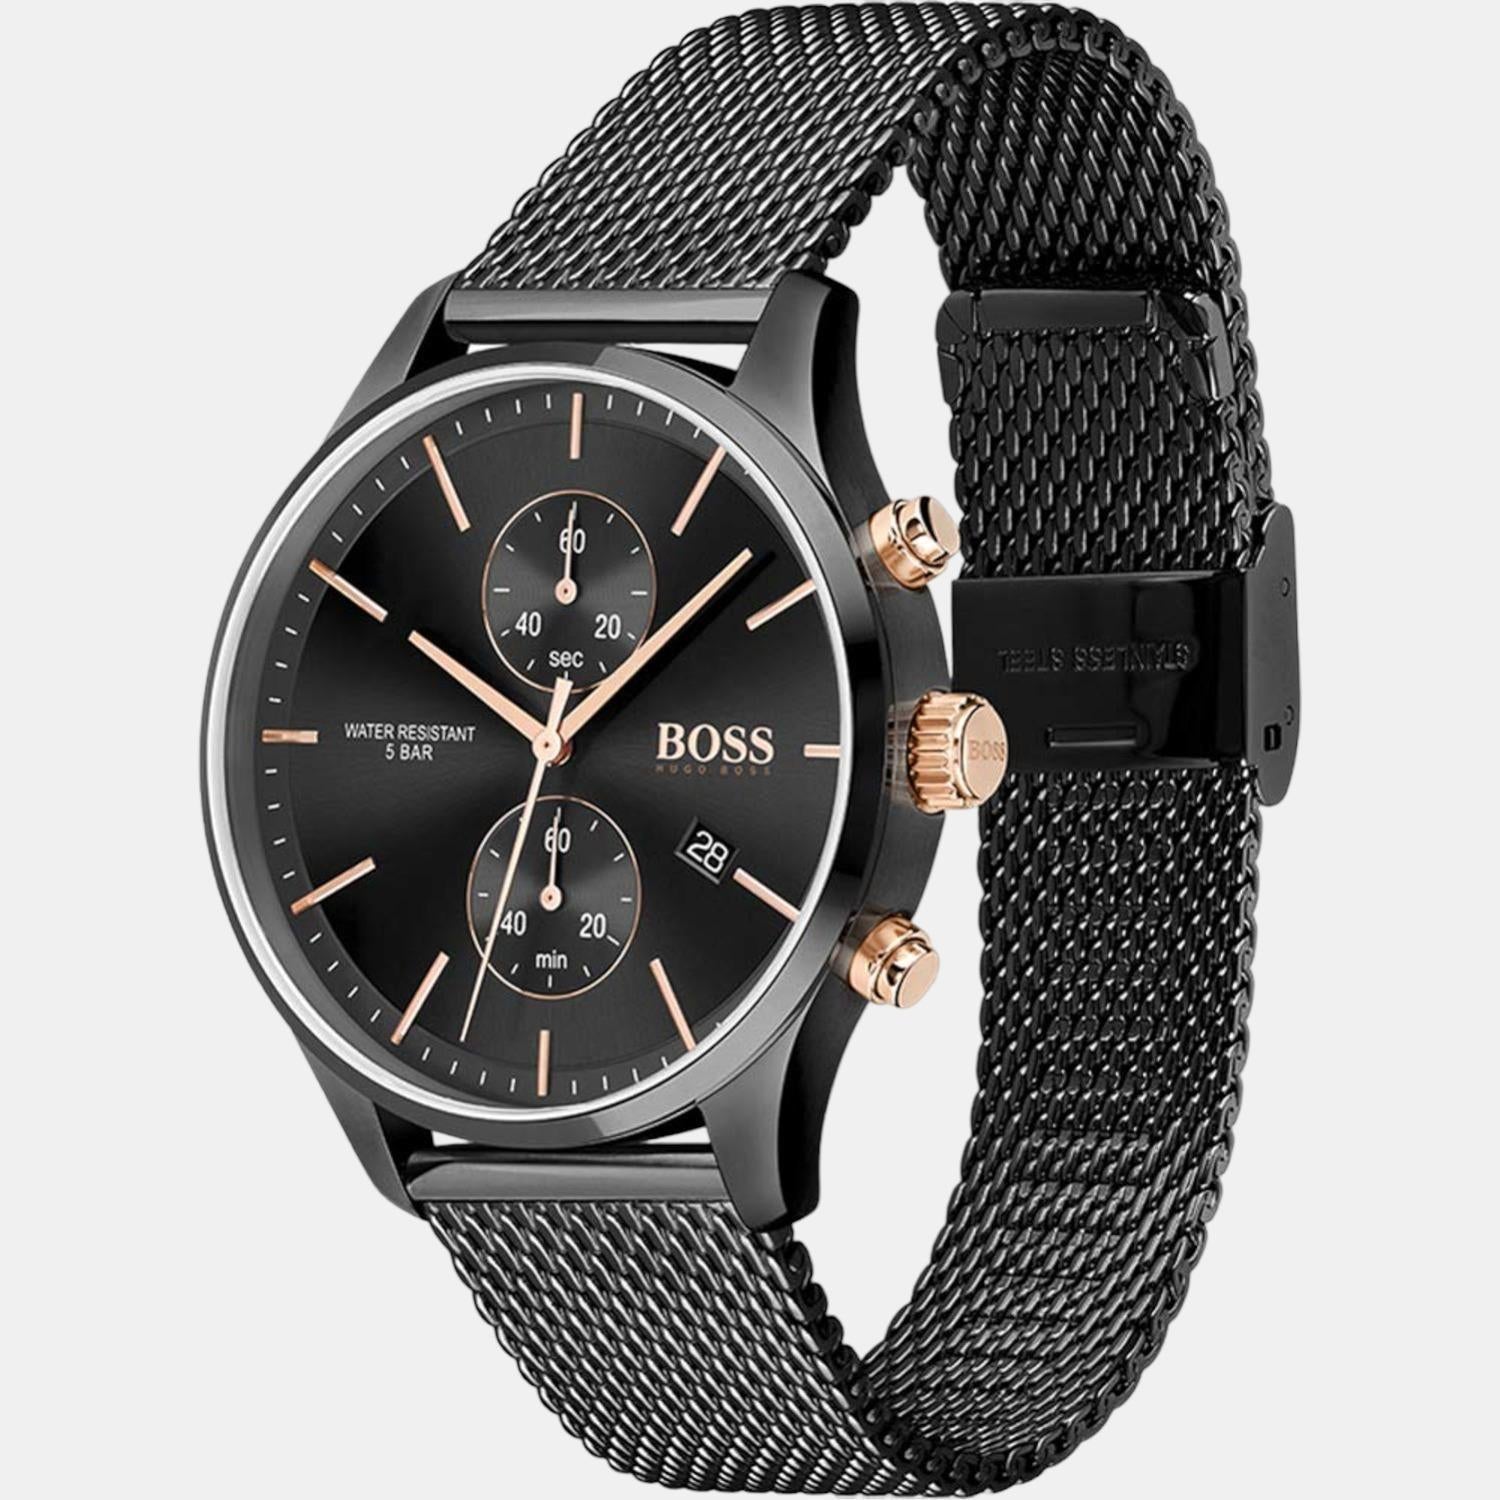 Bose Watch | Leather watch, Accessories, Watches